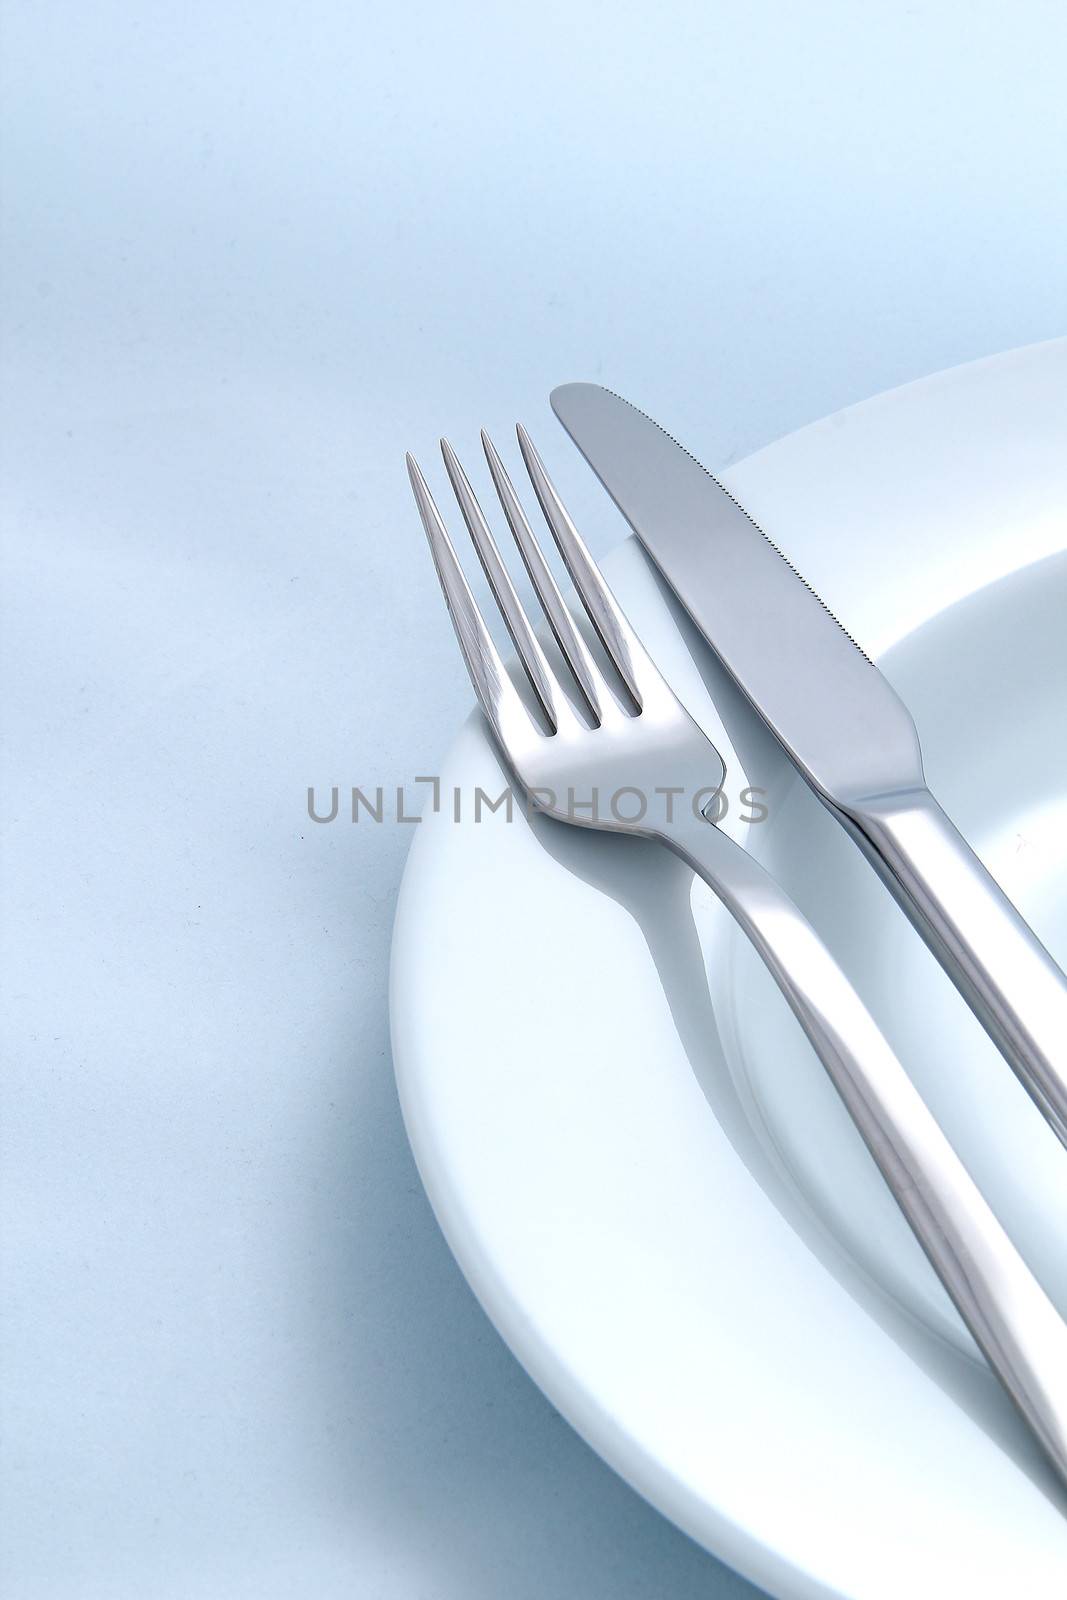 Silver Fork and knife on a dish